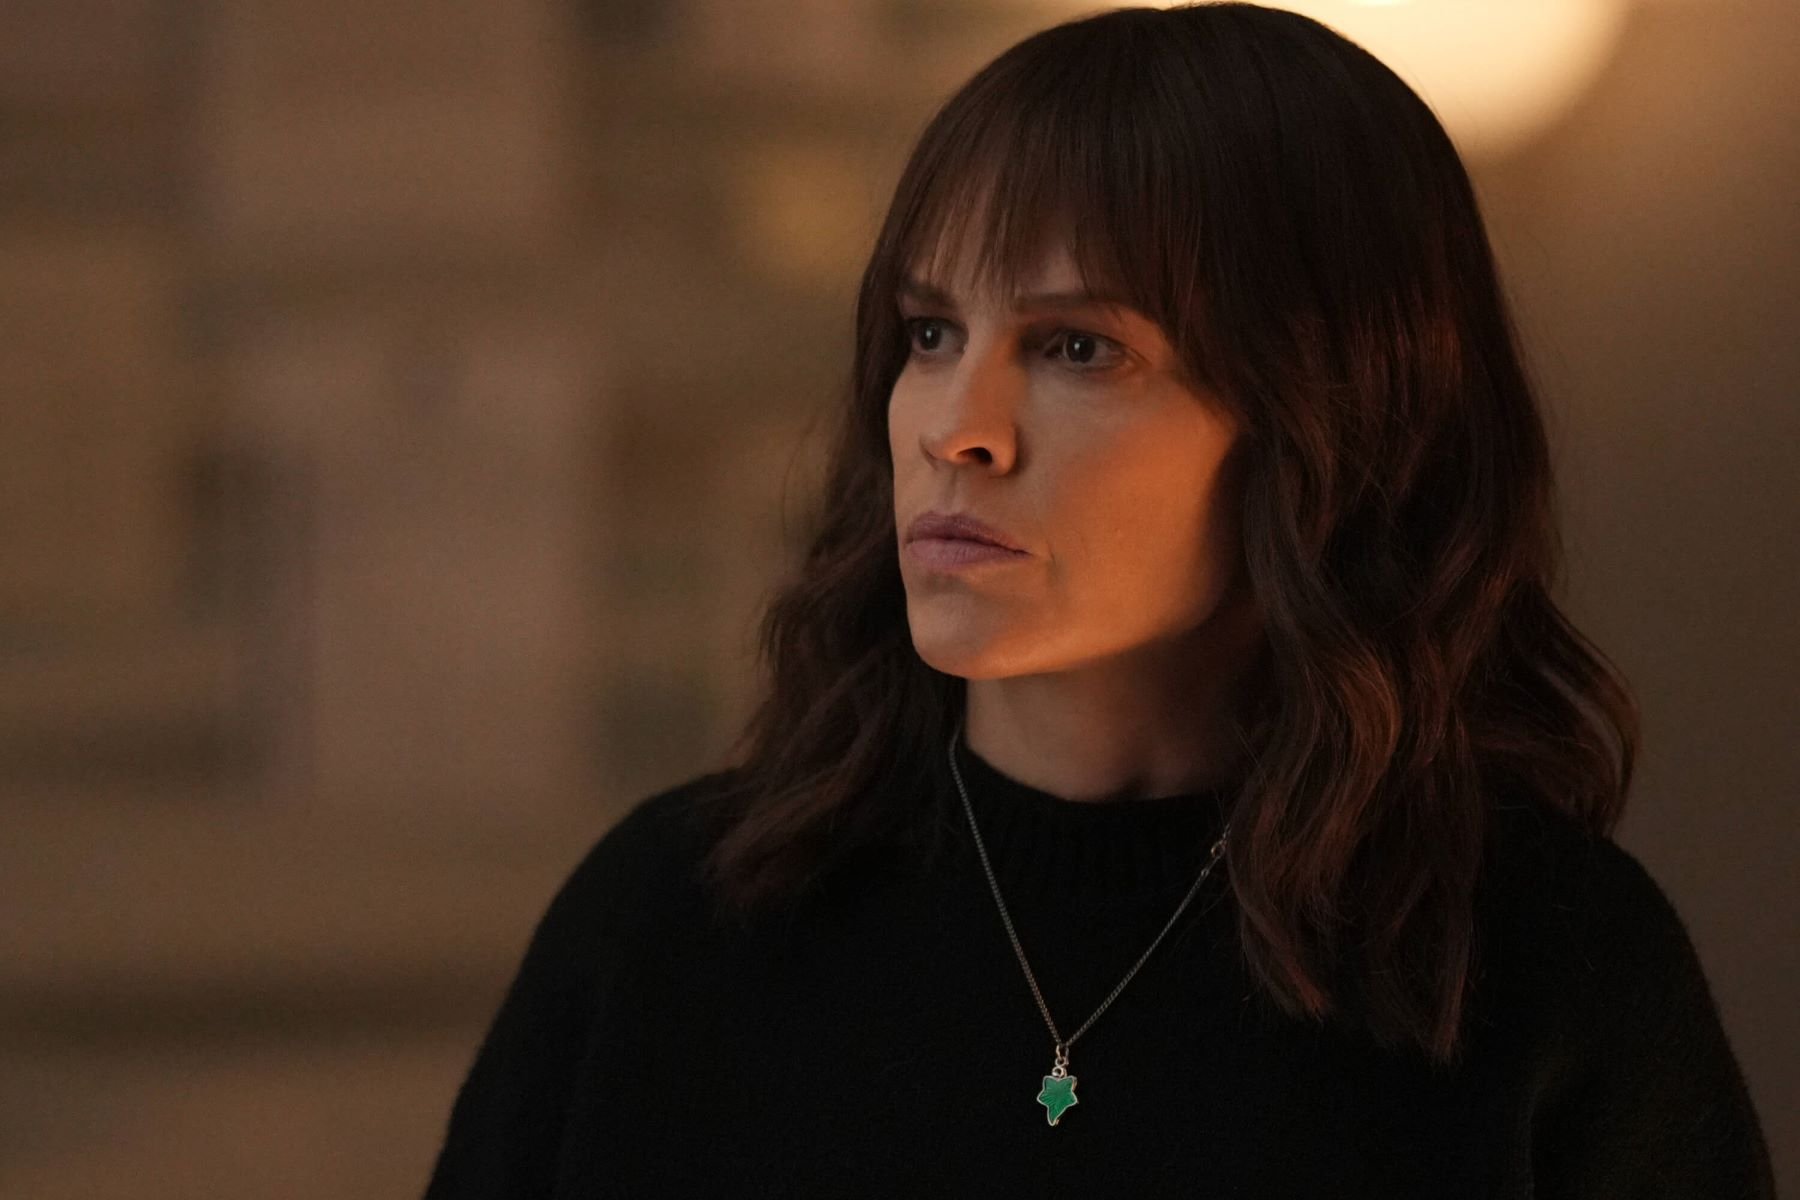 Hilary Swank, in character as Eileen Fitzgerald in 'Alaska Daily' Episode 7 on ABC, wears a black sweater and silver necklace with a green charm.